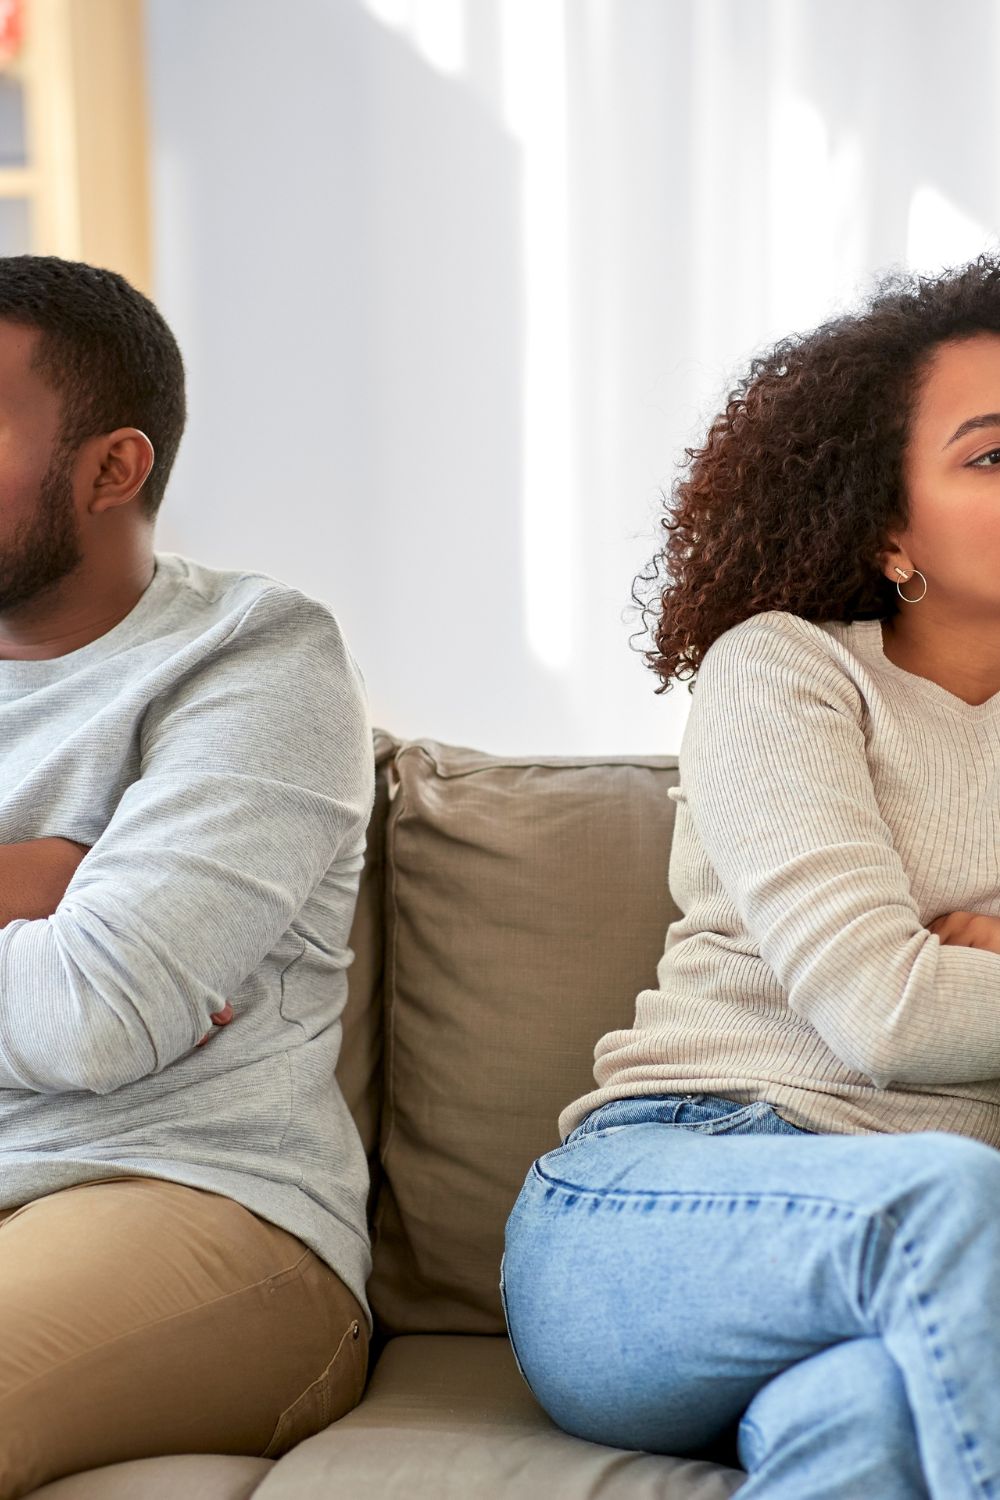 10 Signs You Should Separate From Your Husband